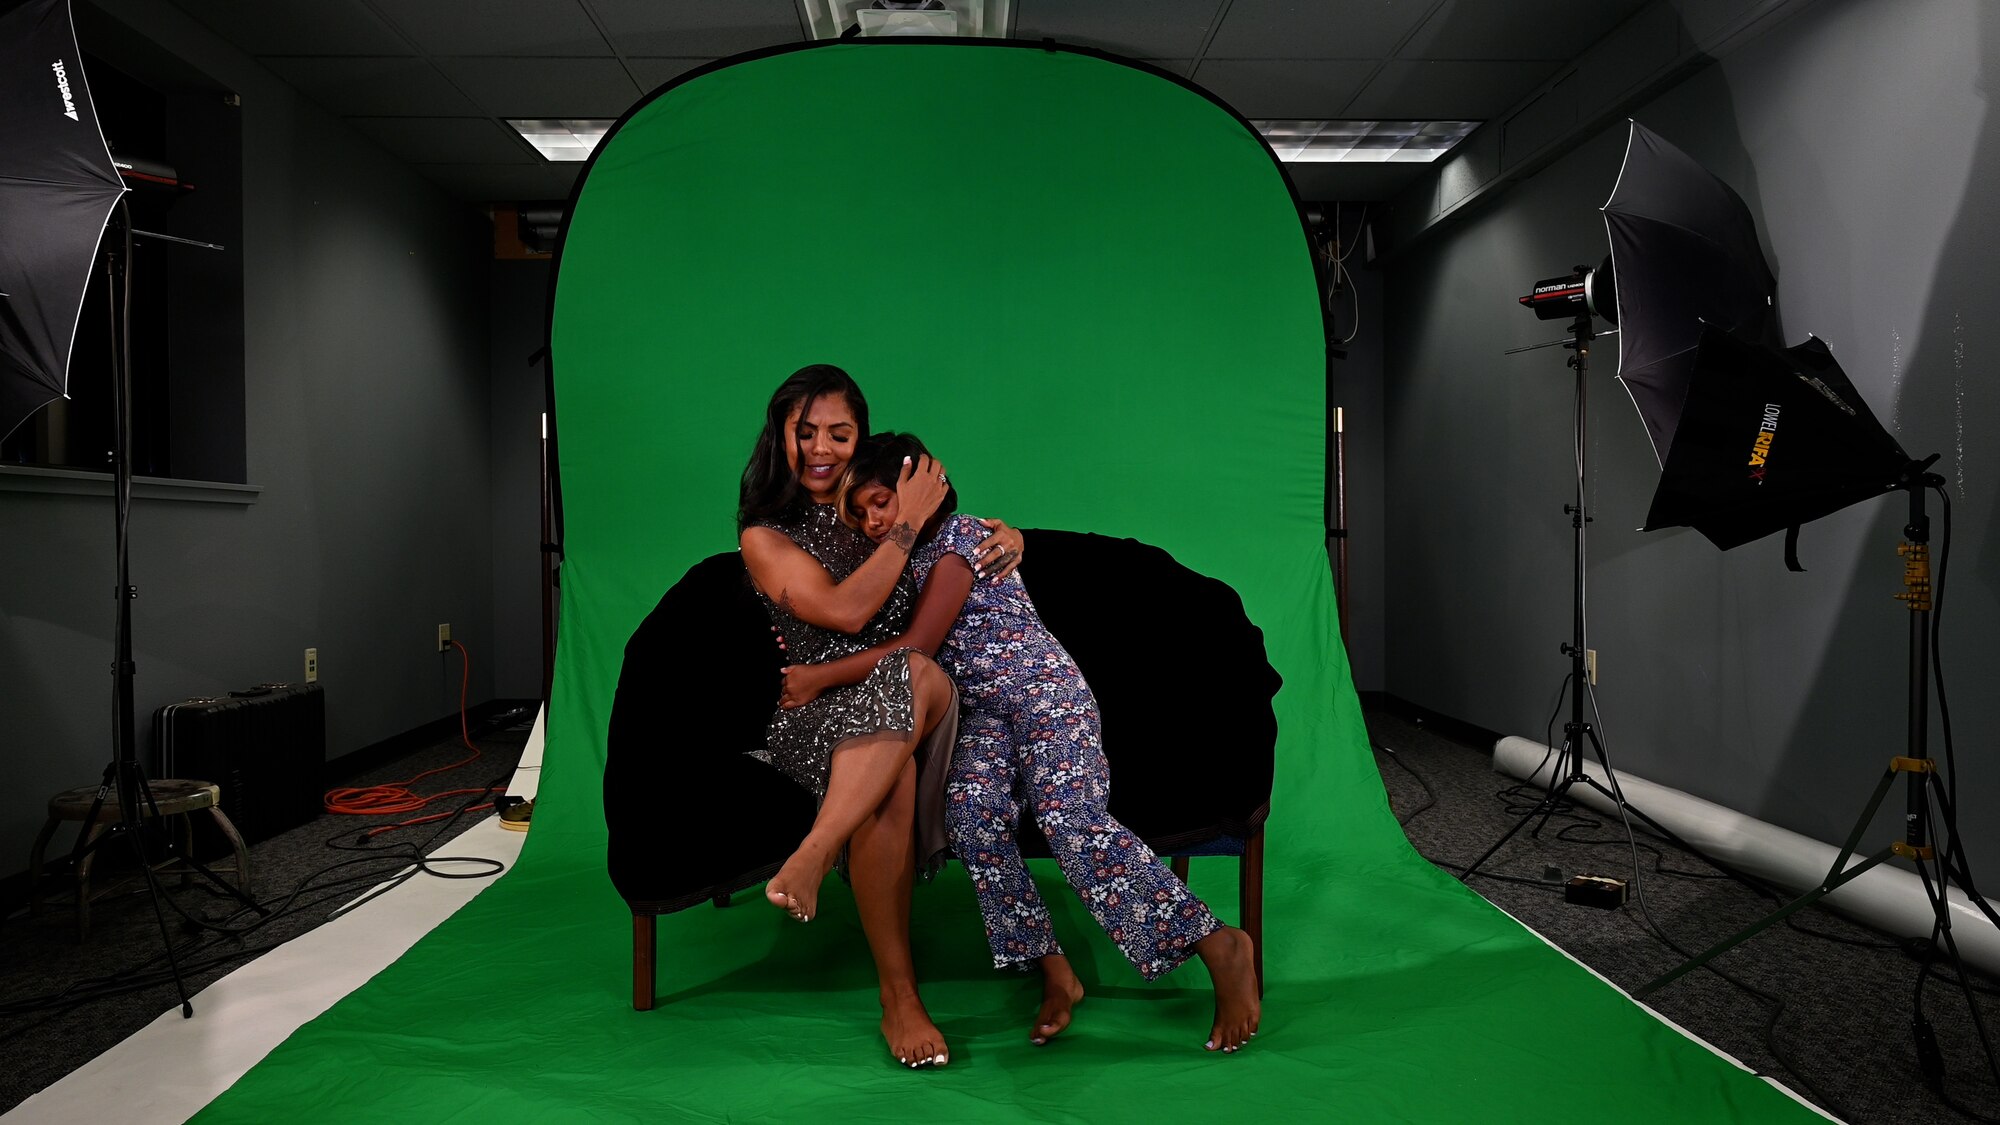 Airman and daughter perform a lip sync routine in front of a green screen